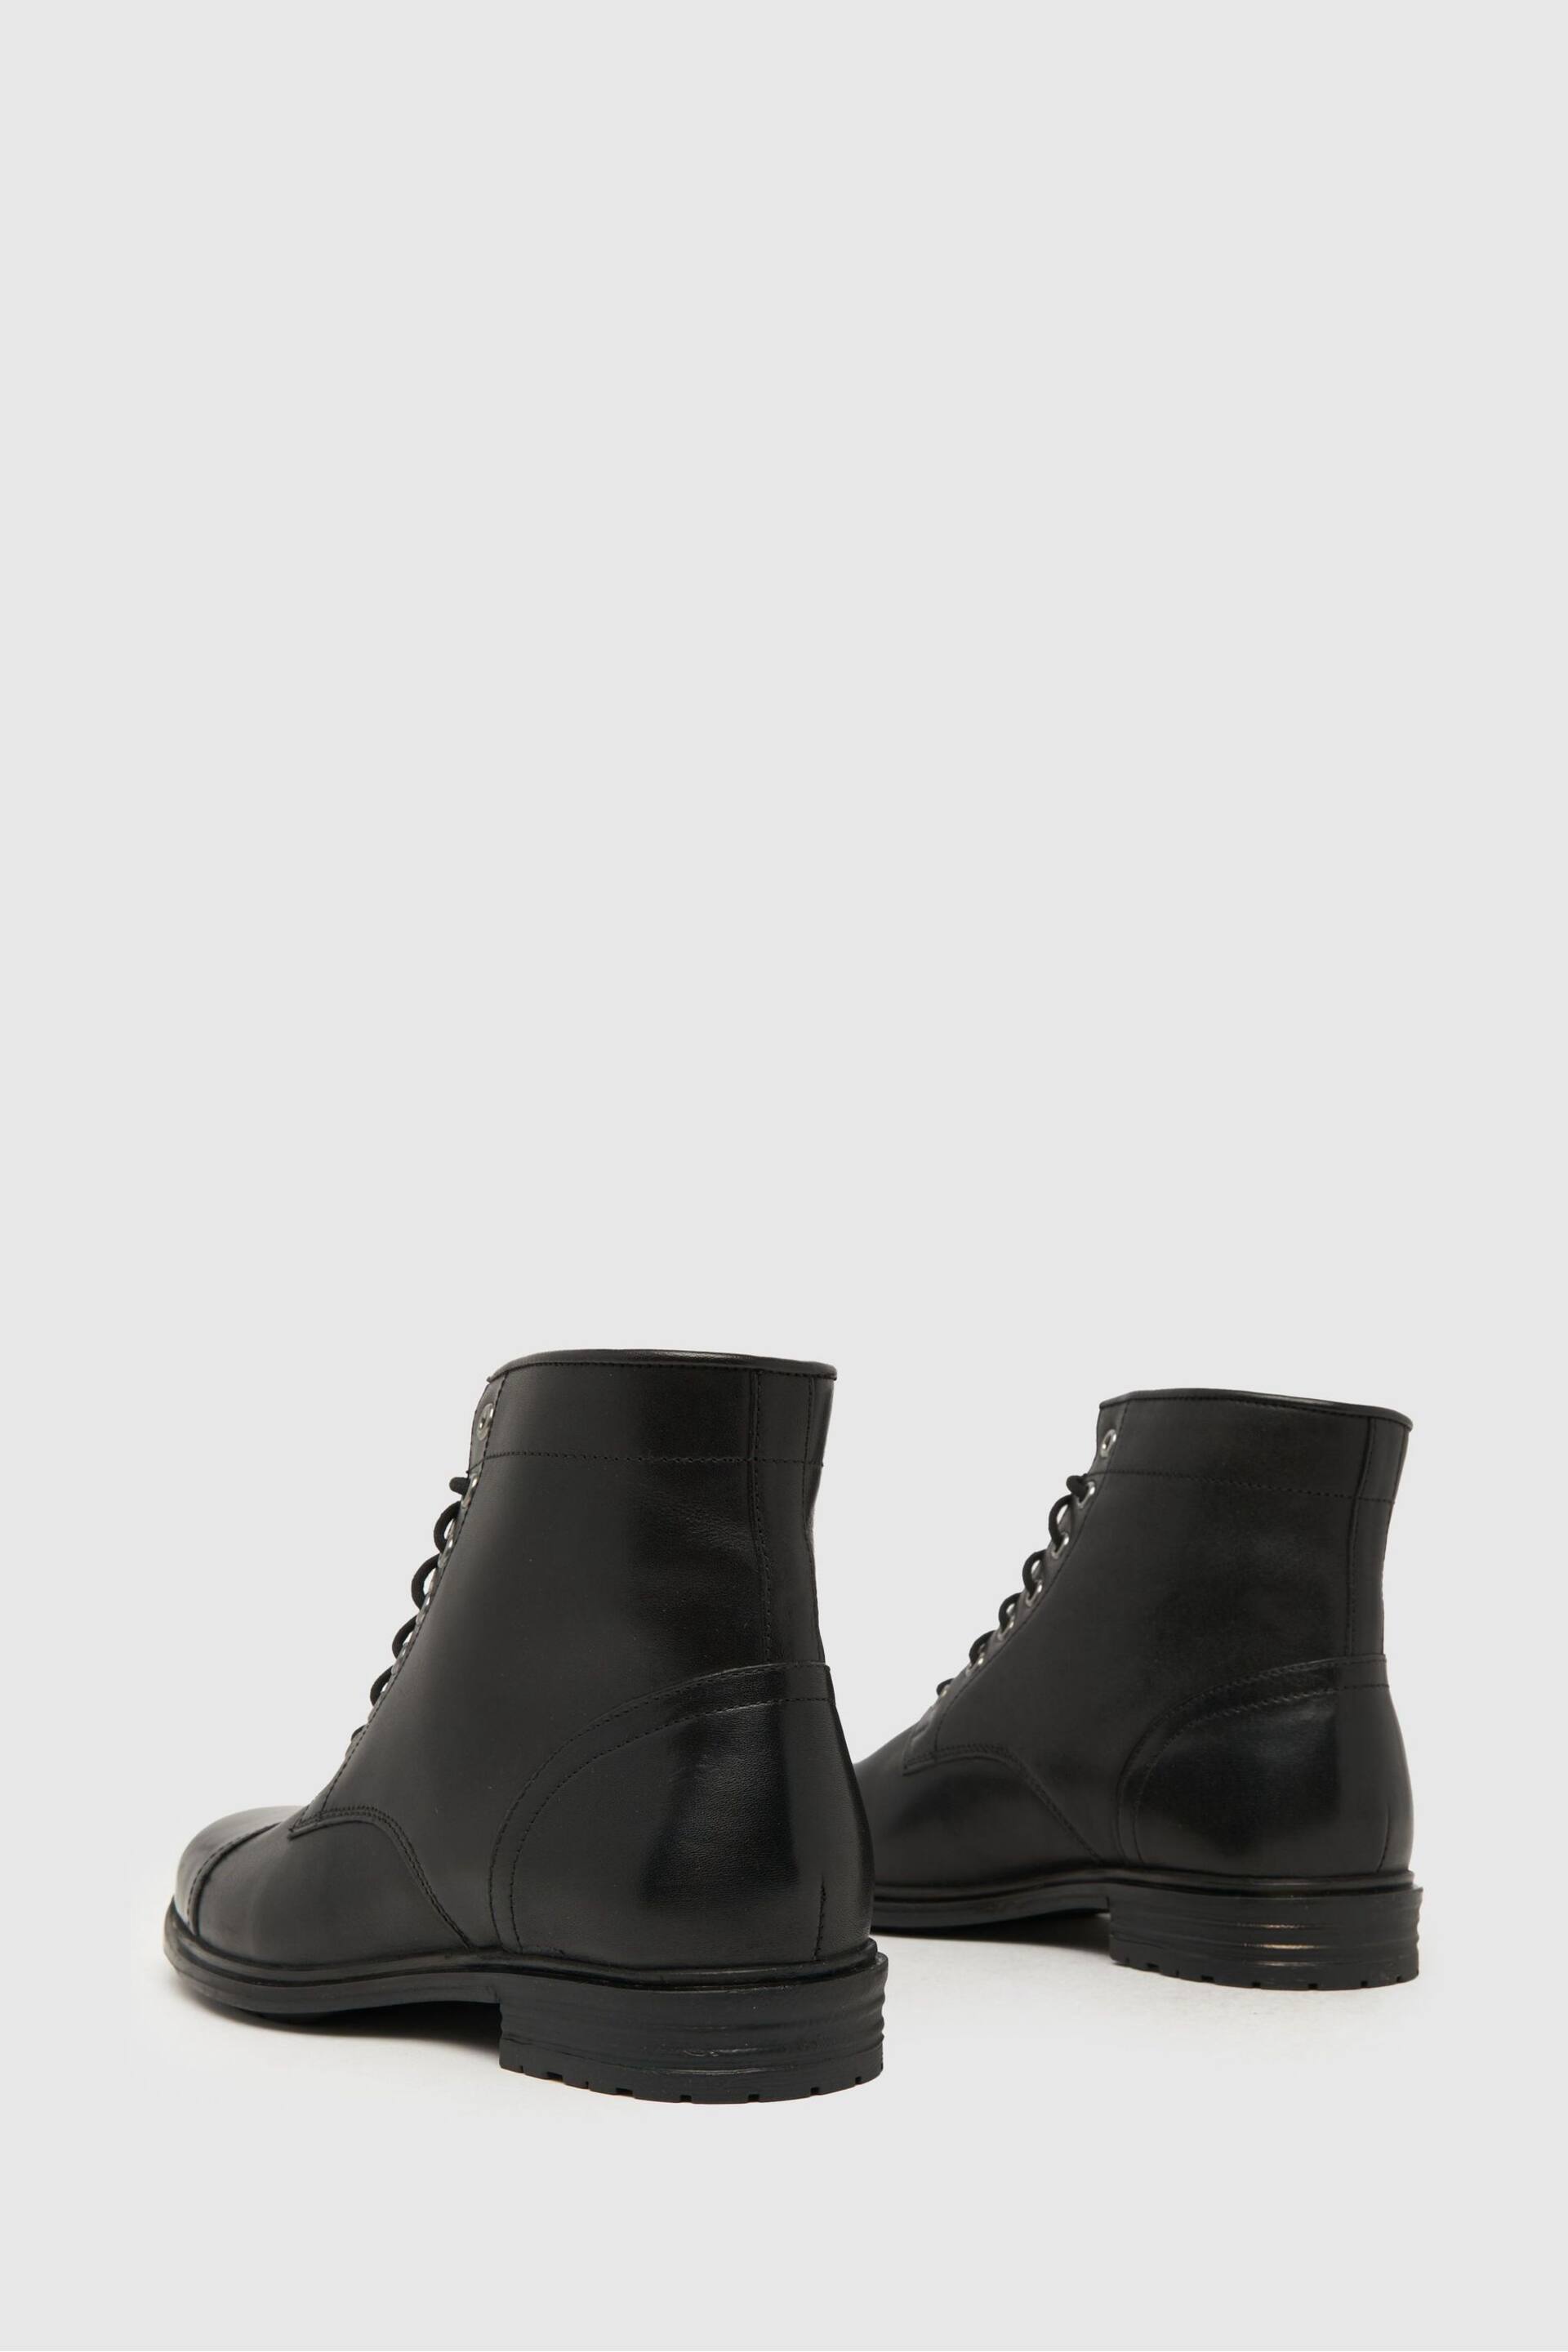 Schuh Deacon Leather Lace Boots - Image 4 of 4